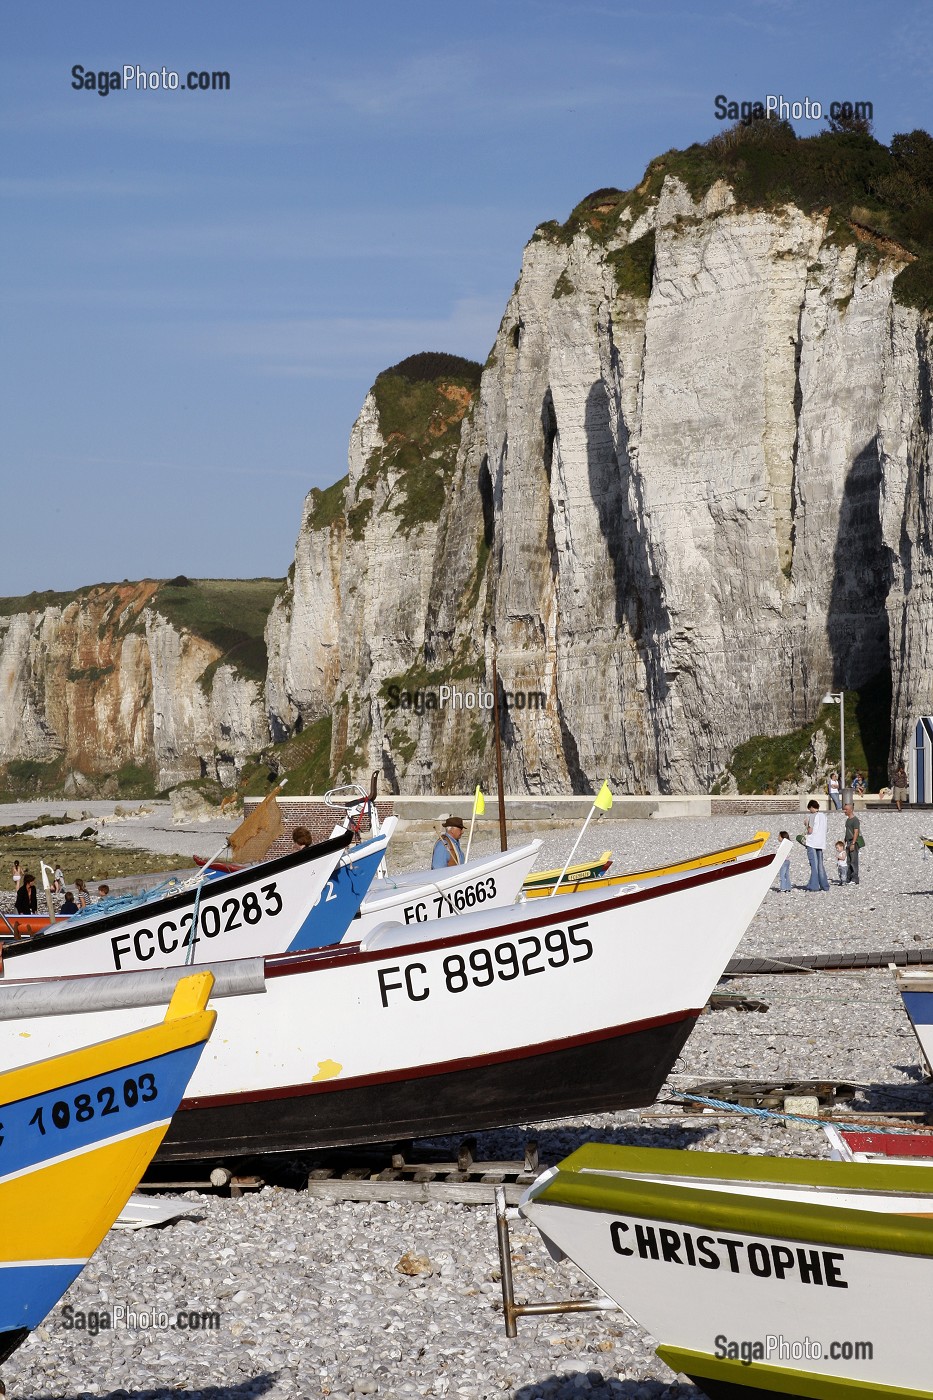  THE COLORFUL FISHING BOATS IN THE LITTLE FISHING PORT OF YPORT, SEINE-MARITIME (76), NORMANDY, FRANCE